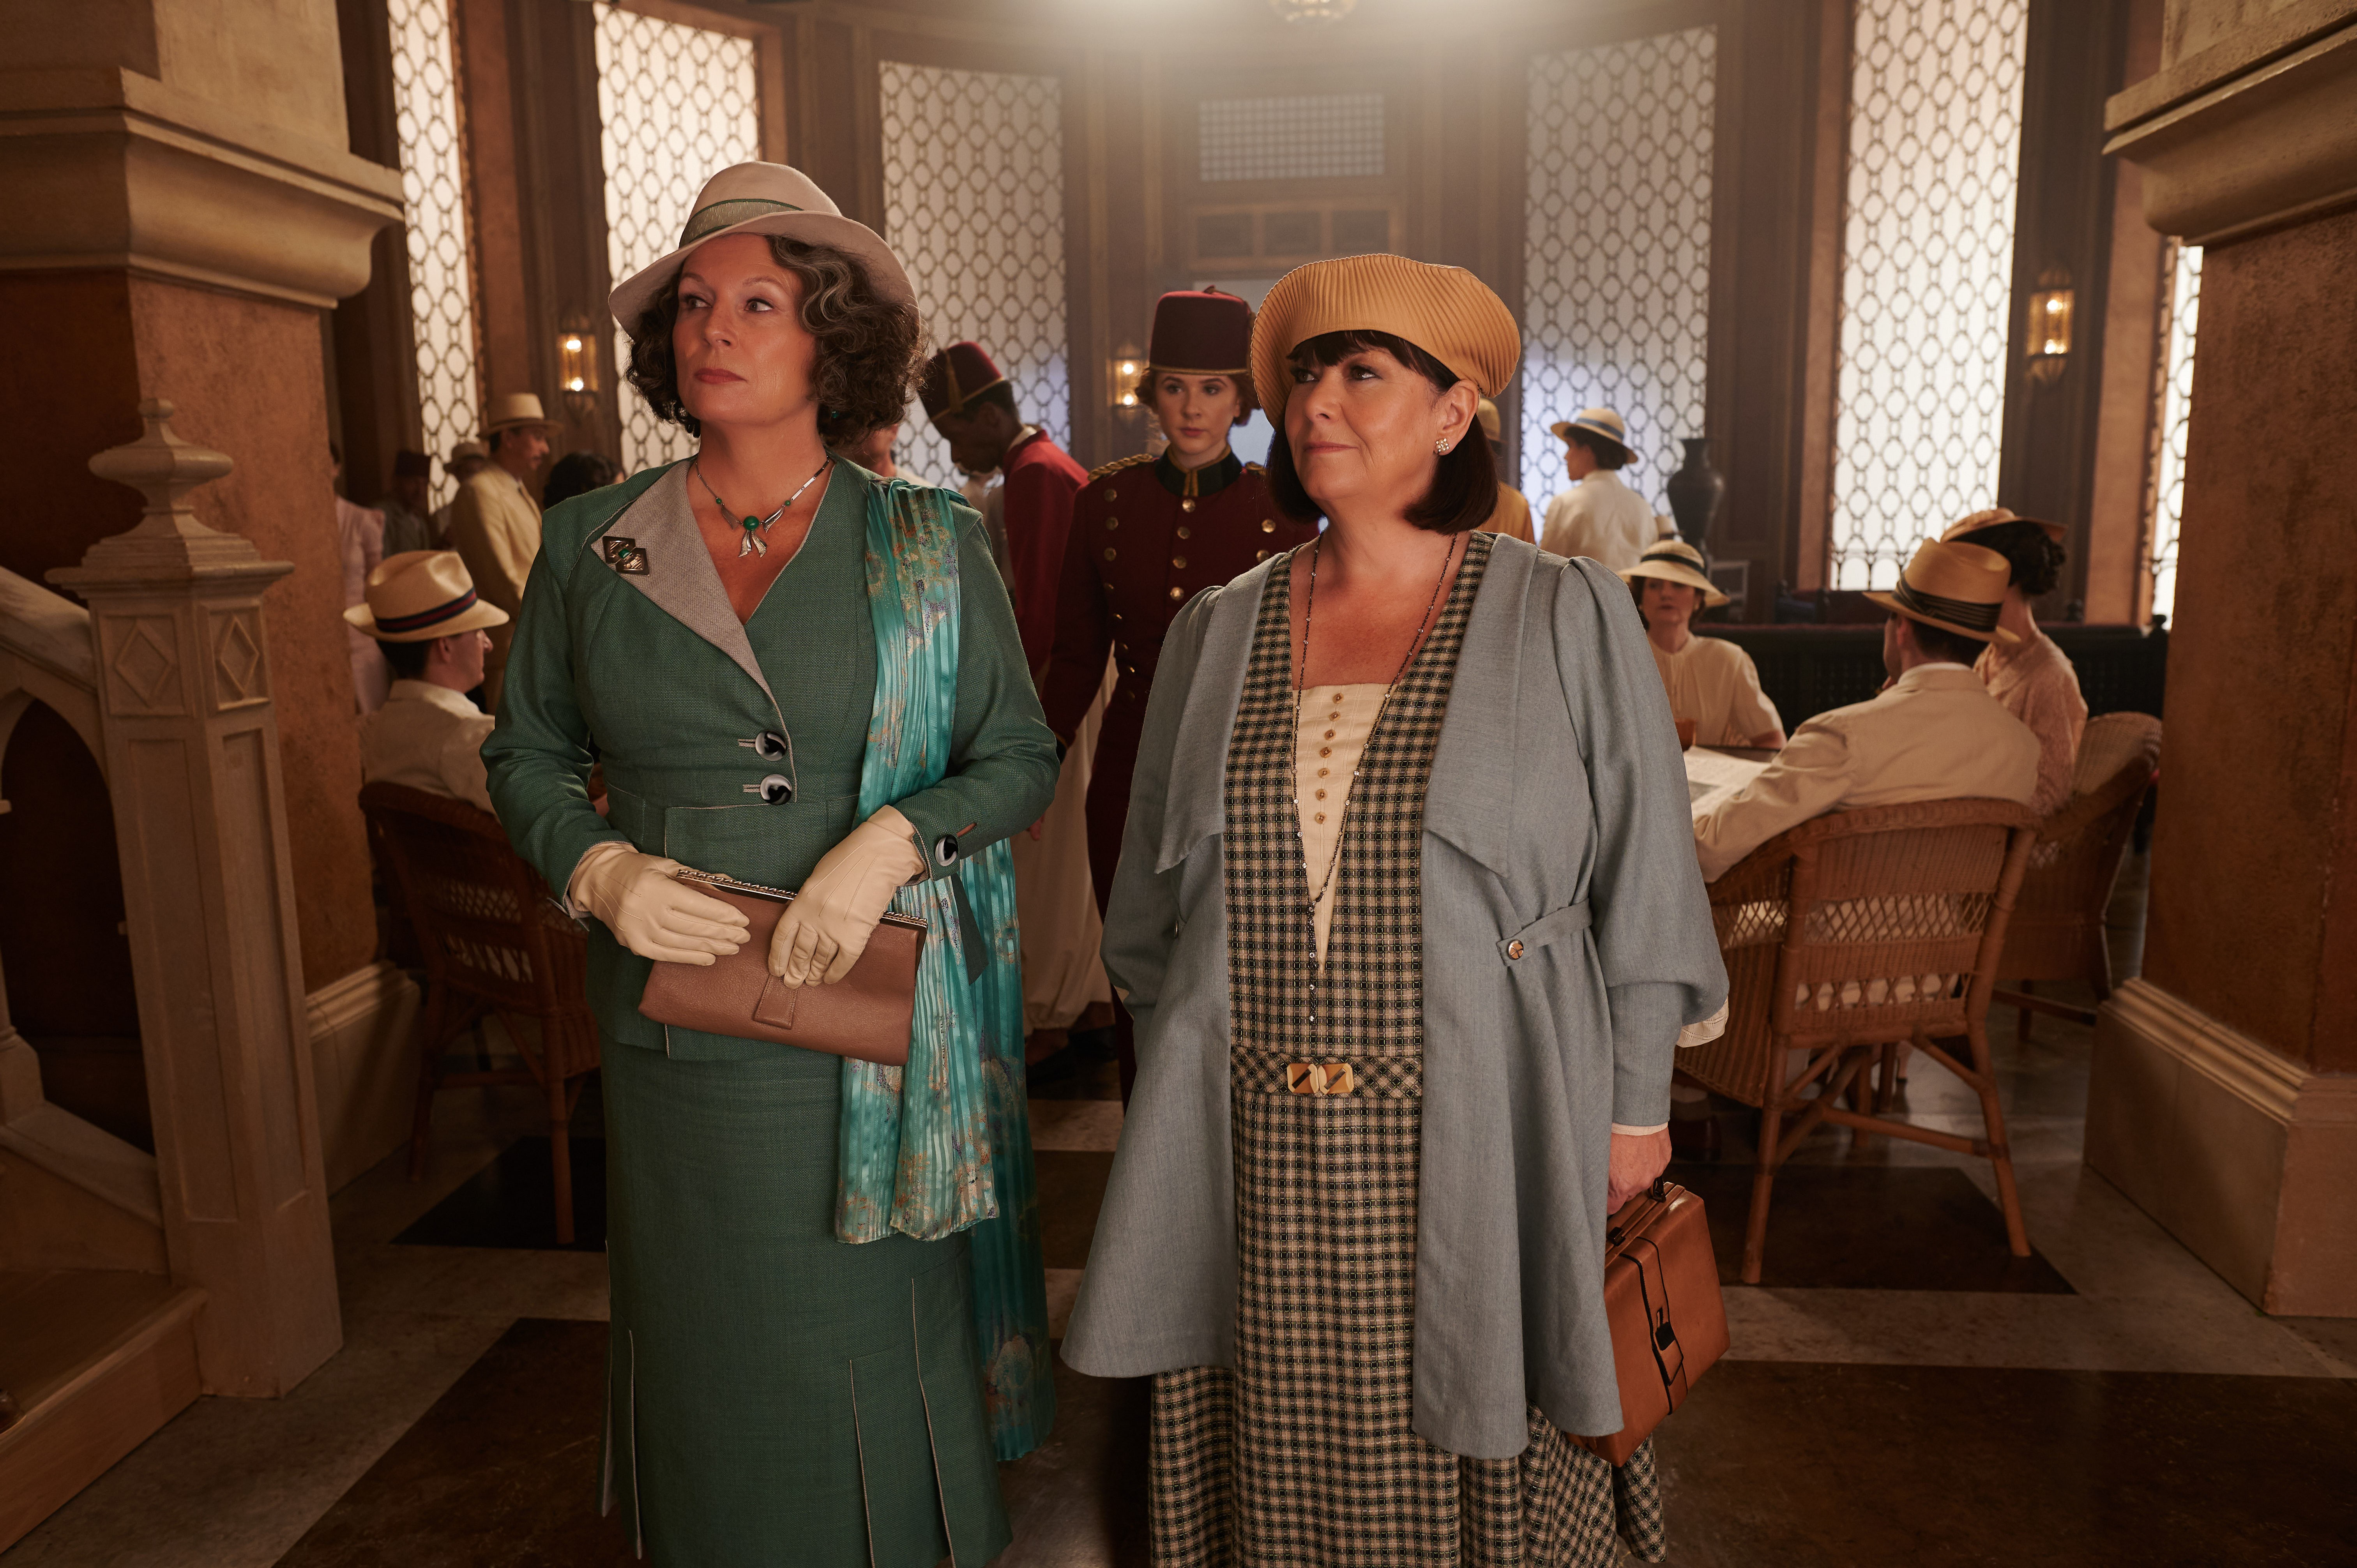 Jennifer Saunders as Marie Van Schuyler and Dawn French as Bowers in 20th Century Studios’ DEATH ON THE NILE, a mystery-thriller directed by Kenneth Branagh based on Agatha Christie’s 1937 novel. Photo by Rob Youngson. © 2020 Twentieth Century Fox Film Co (Foto: Photo by Rob Youngson)